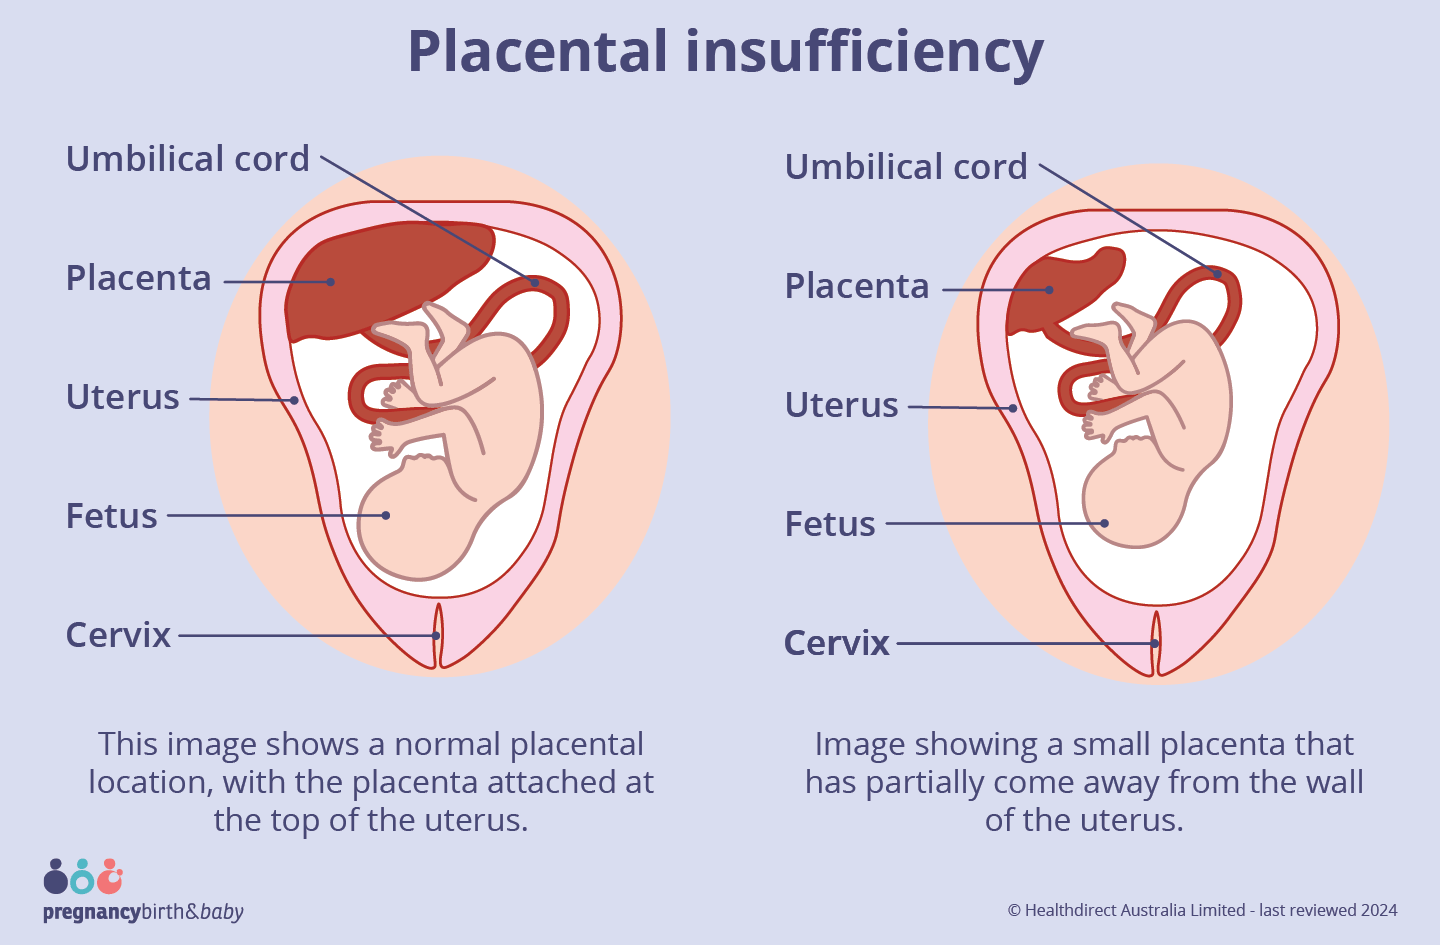 Image showing a small placenta that has partially come away from the wall of the uterus.